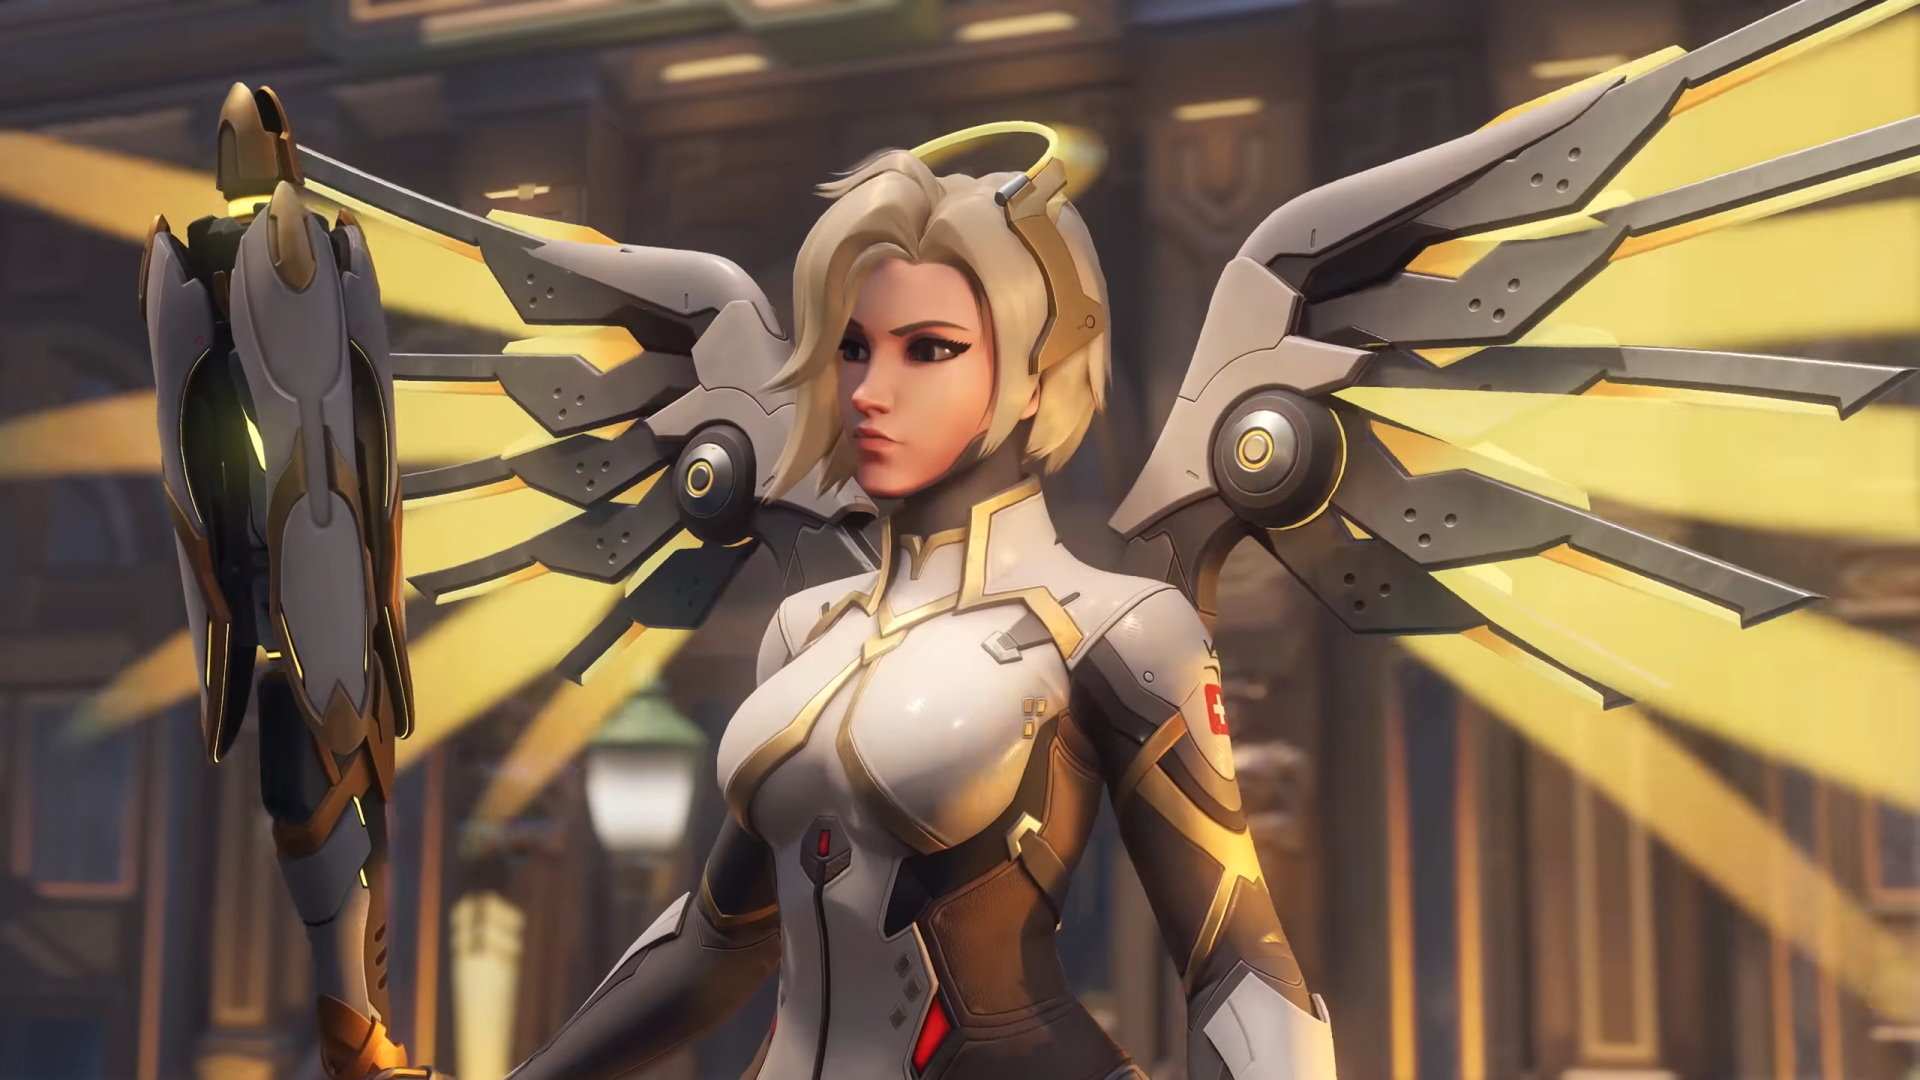 How to super jump as Mercy in Overwatch 2